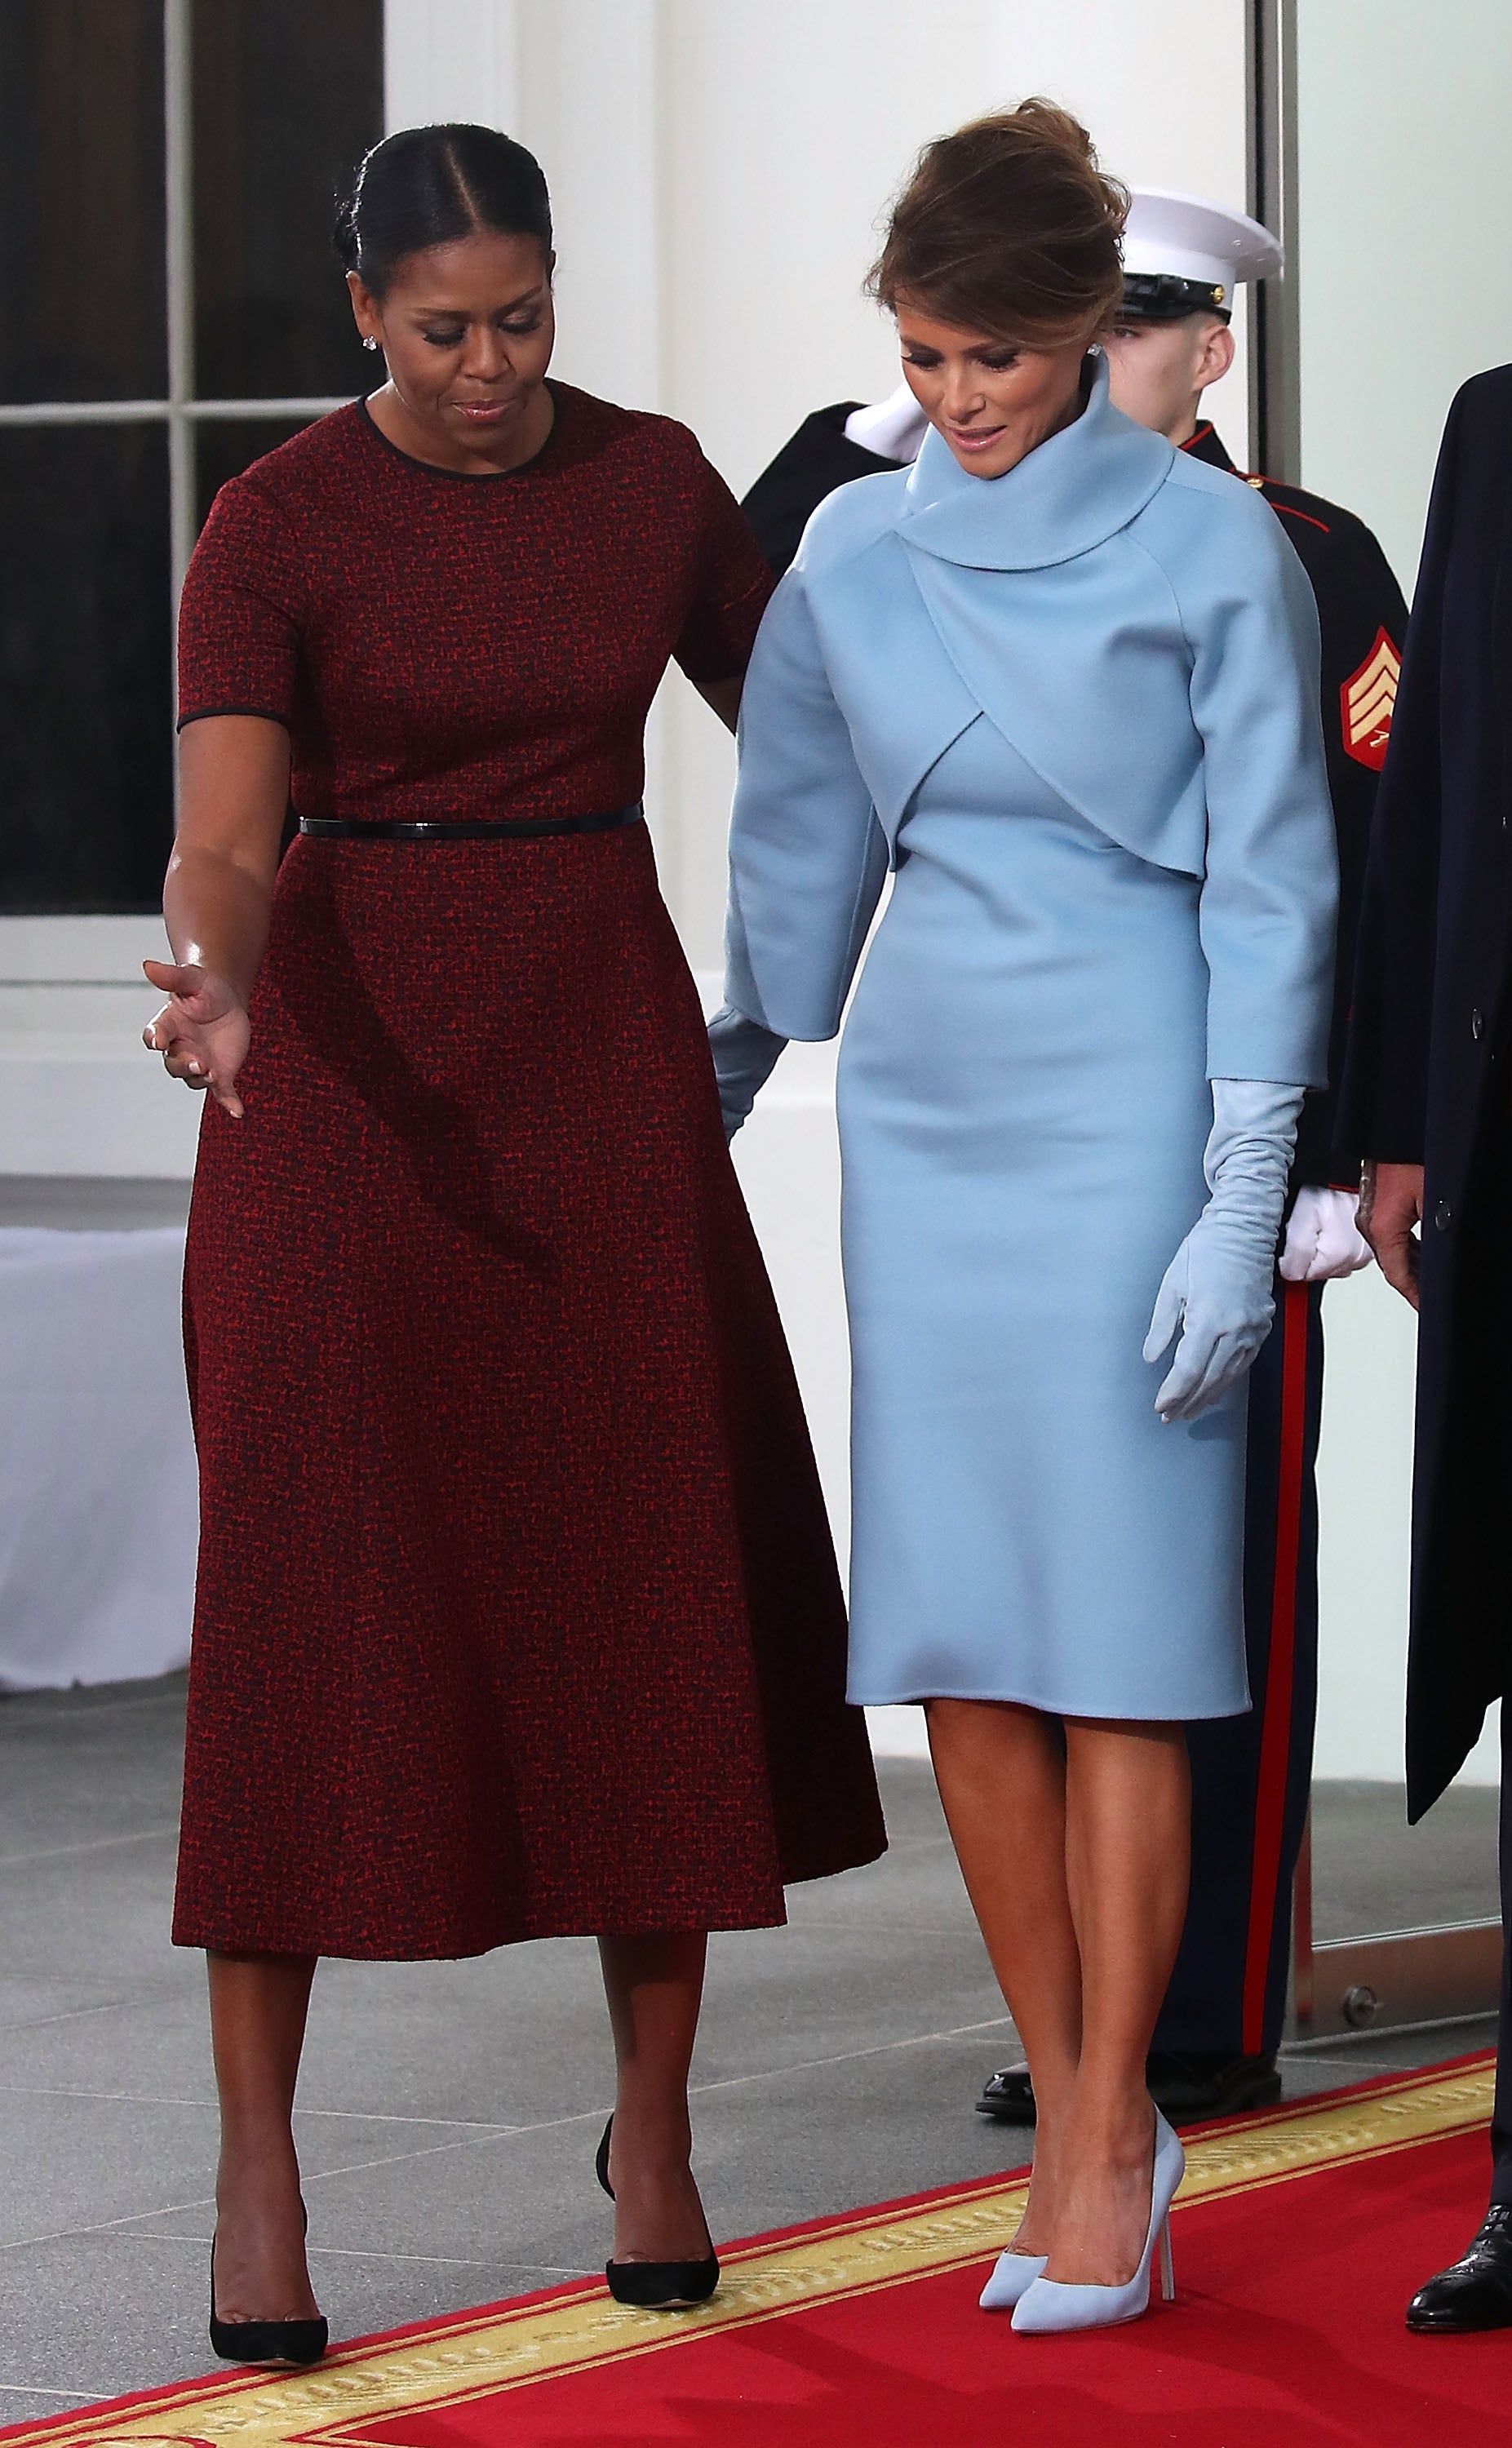 That Awkward Moment: Michelle Obama Finally Reveals What Melania Trump Gifted Her On Inauguration Day
